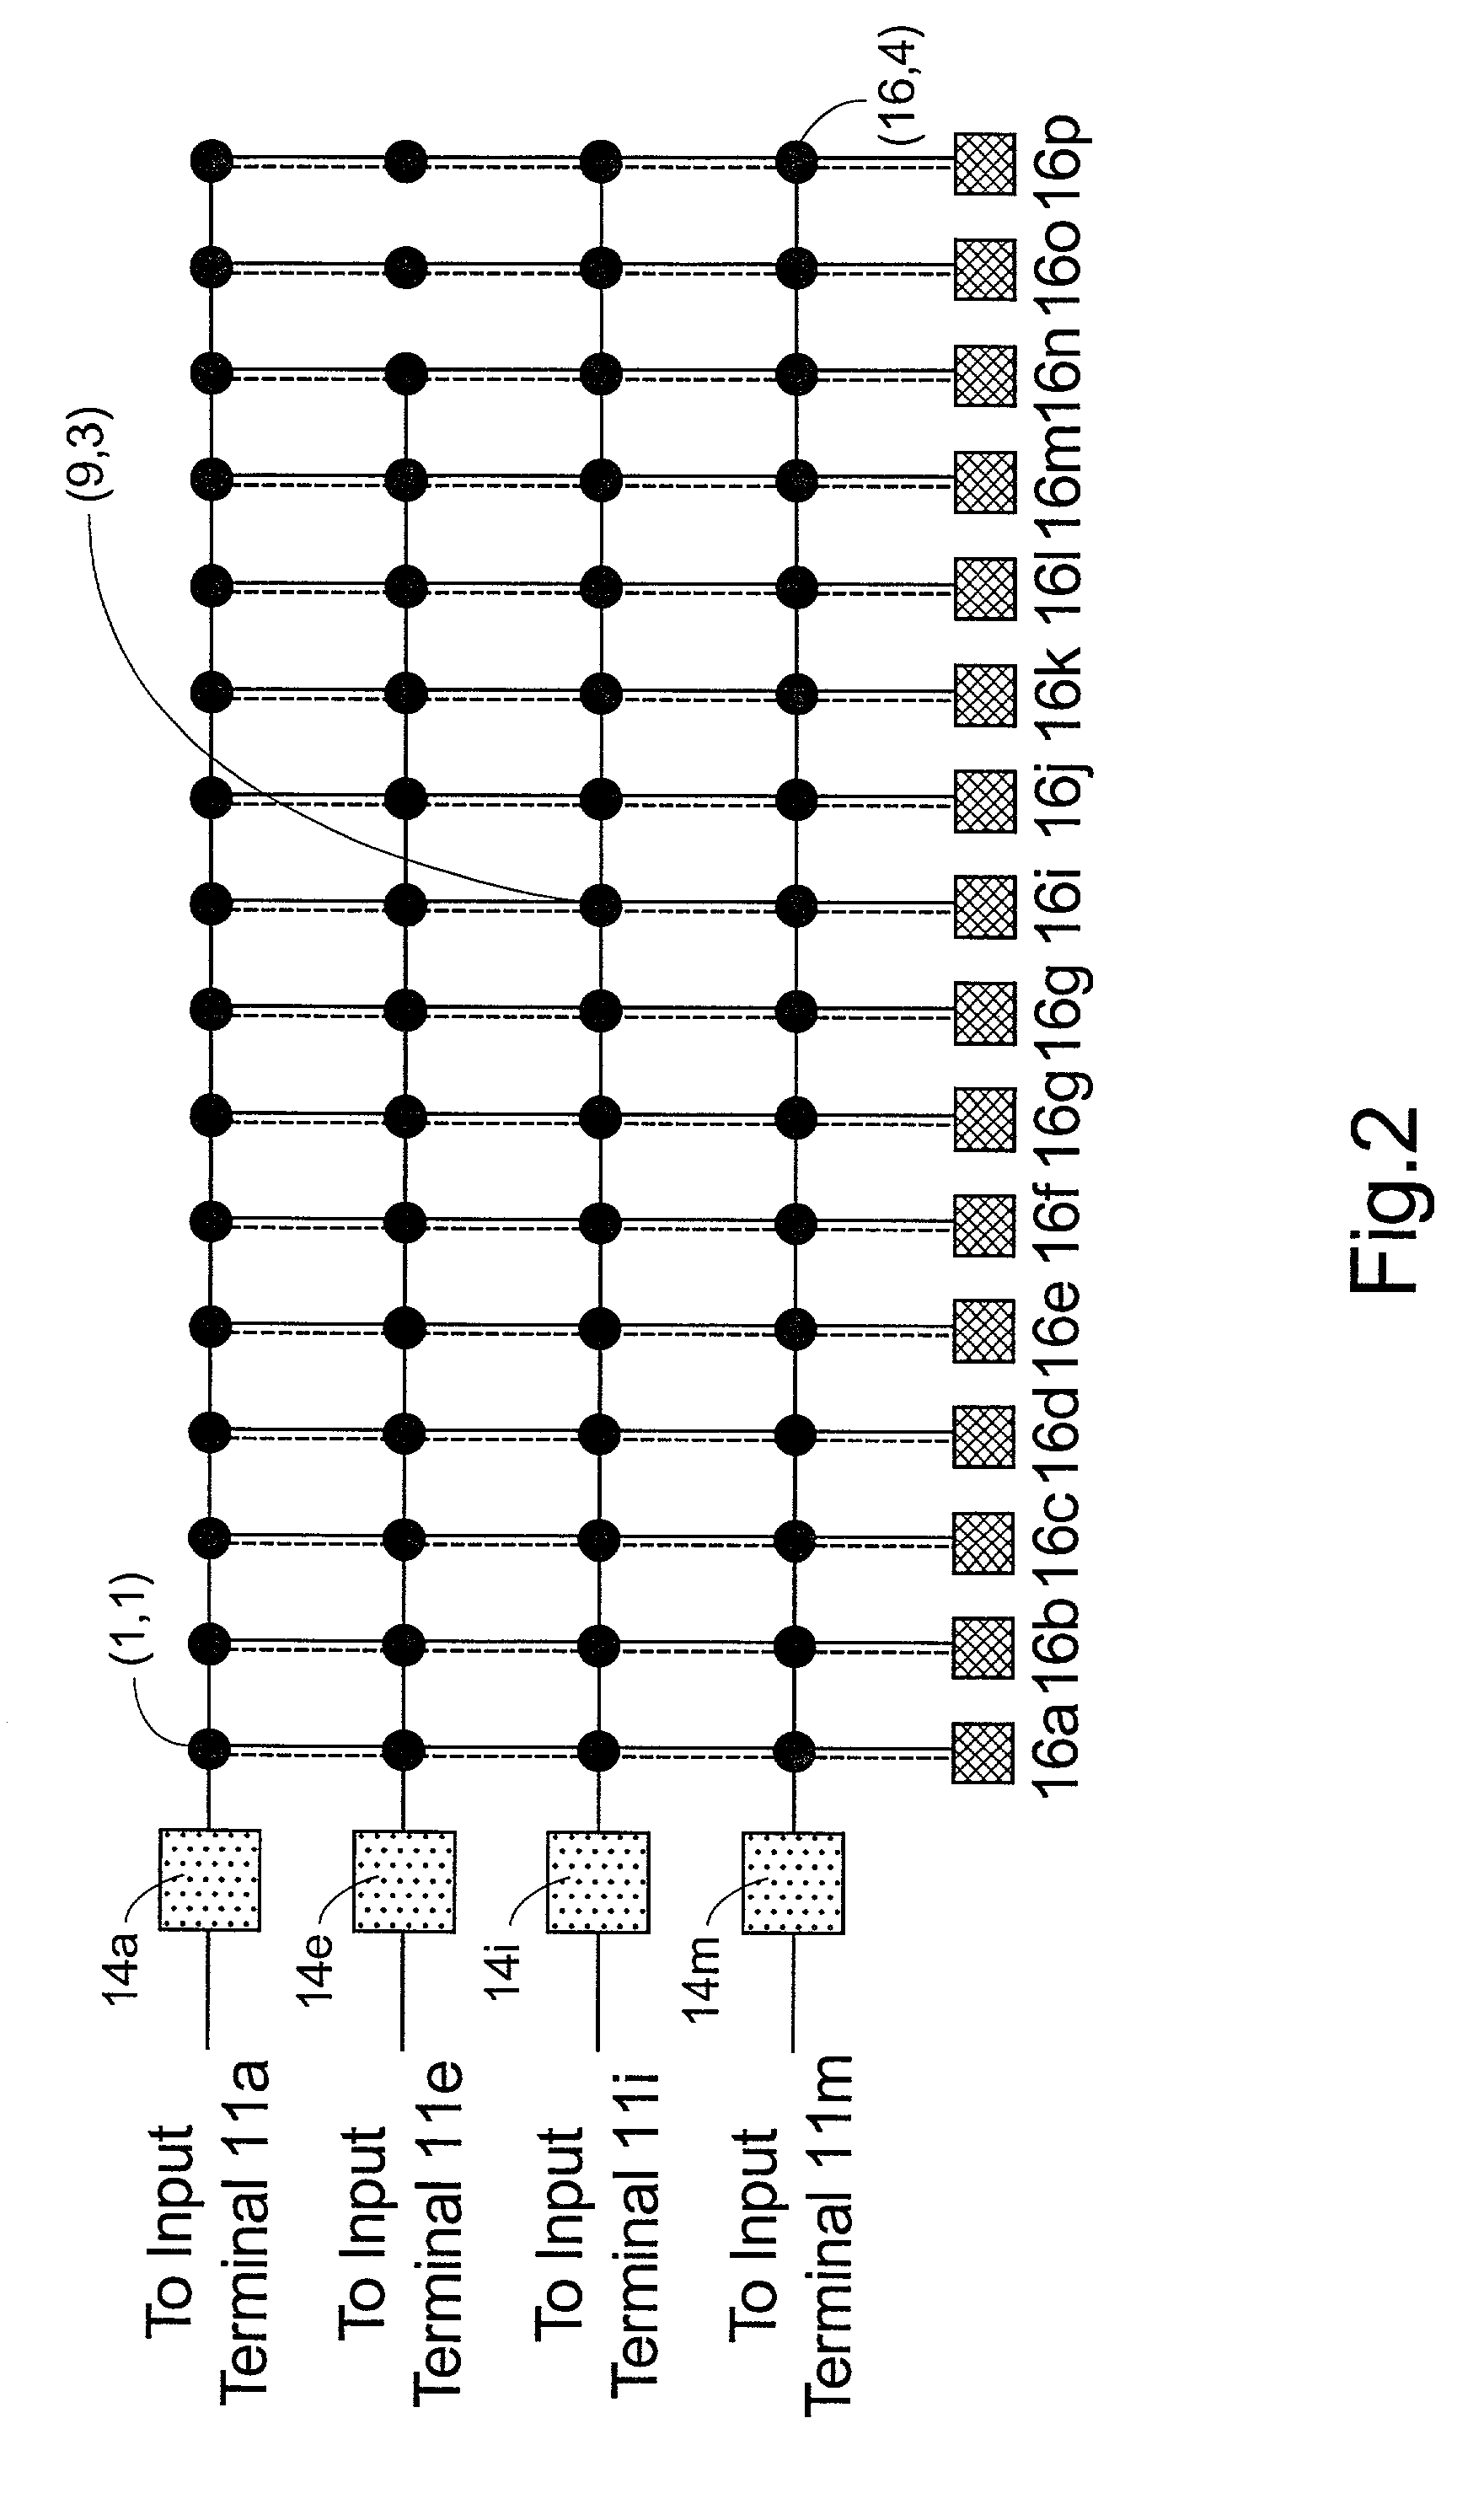 Self-routing data switching system